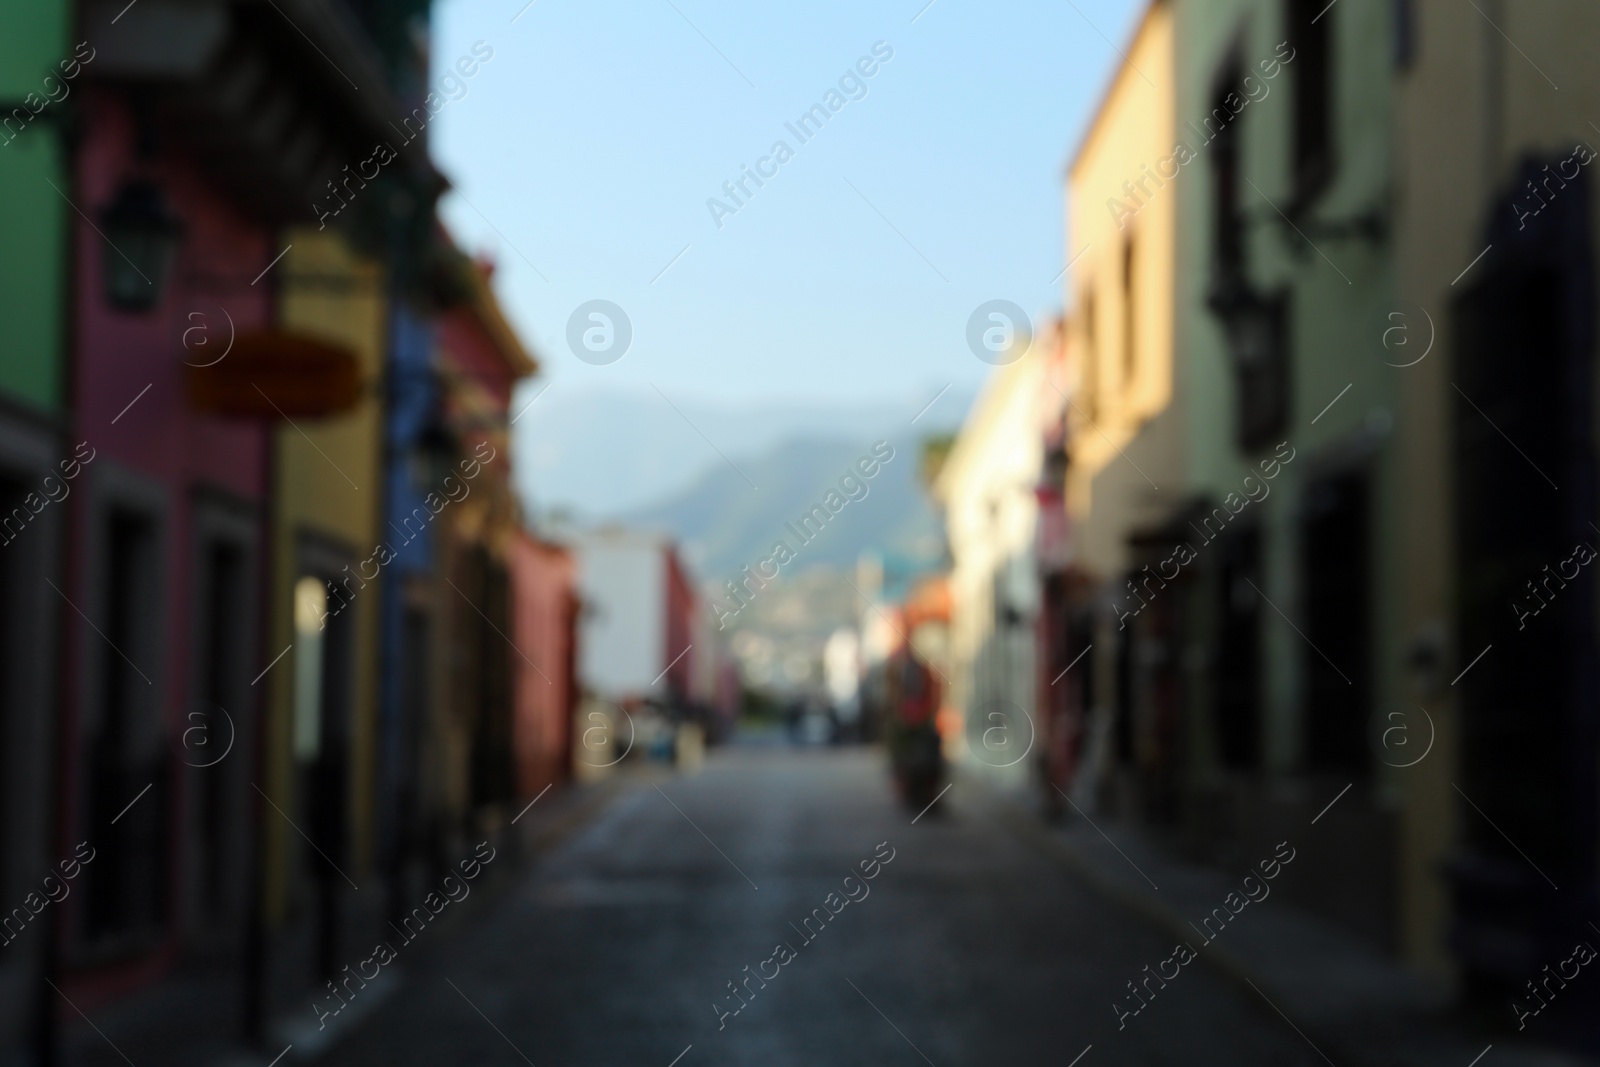 Photo of Blurred view of city street with old buildings